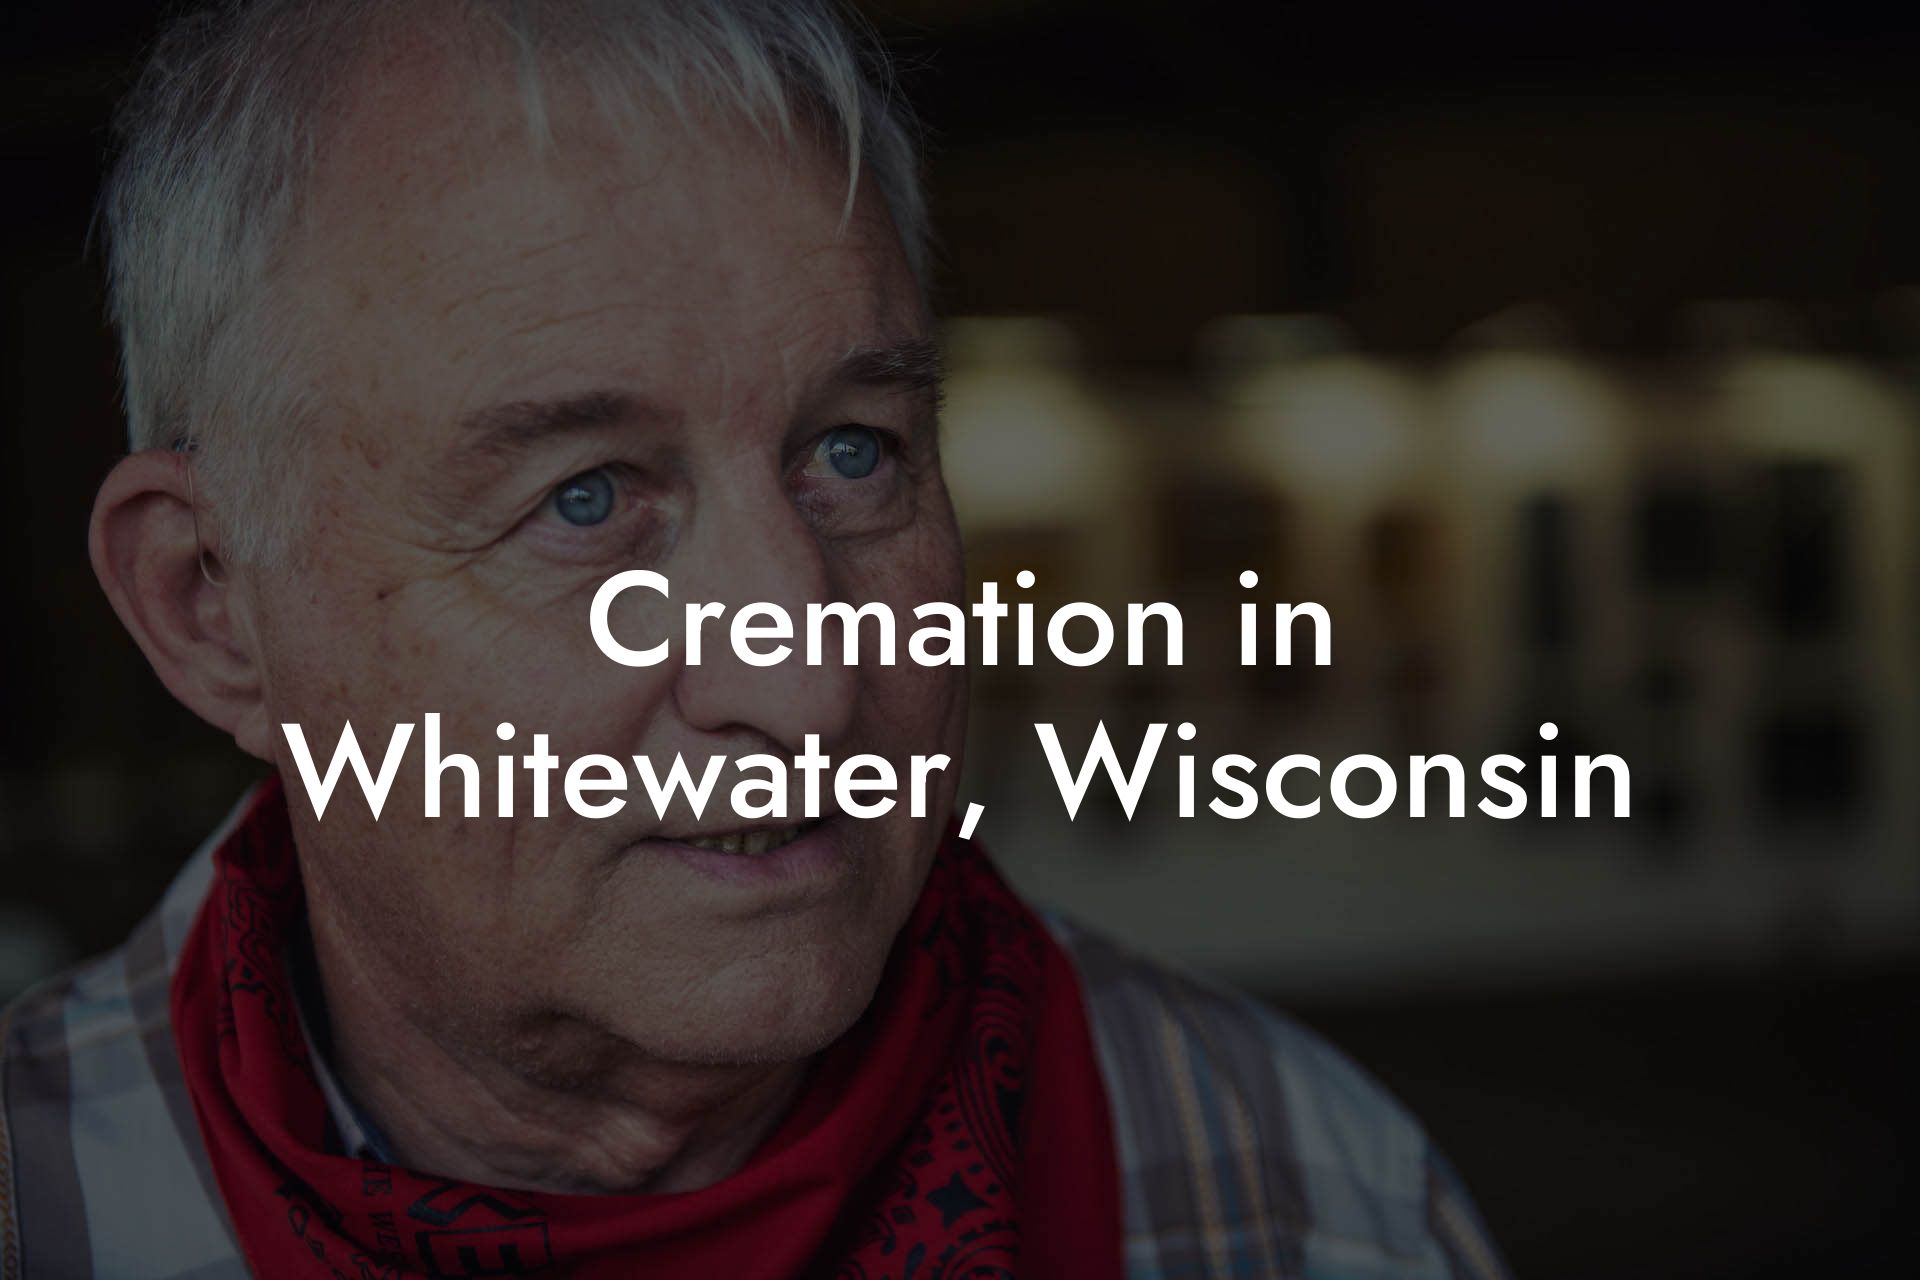 Cremation in Whitewater, Wisconsin